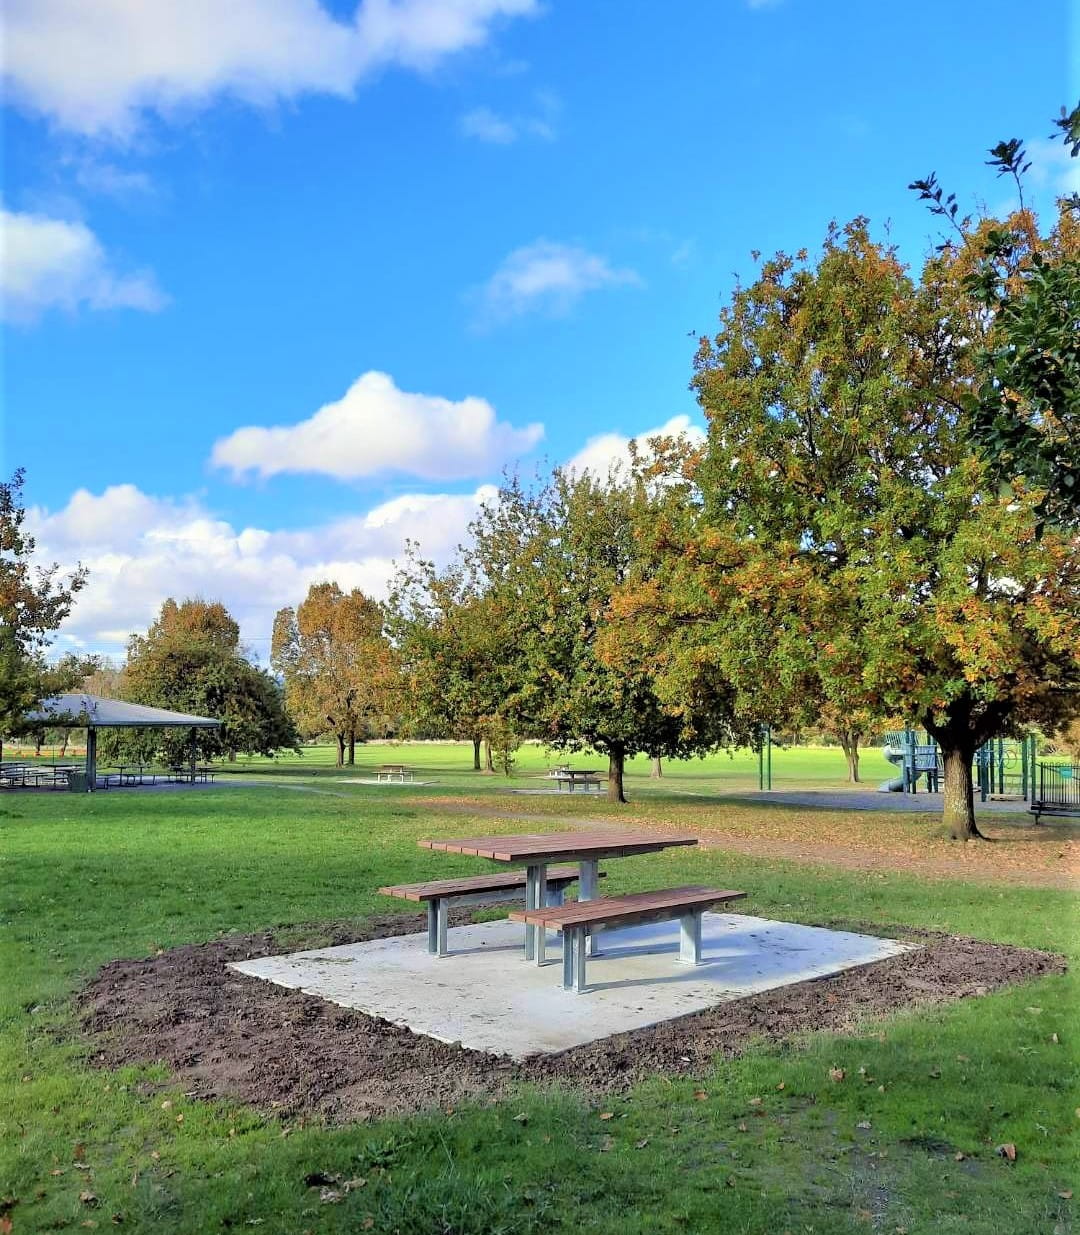 A new picnic table installed at Jells Park. The table is surrounded by a large concrete slab, and green grass. Autumn foliage and blue skies frame the photo.